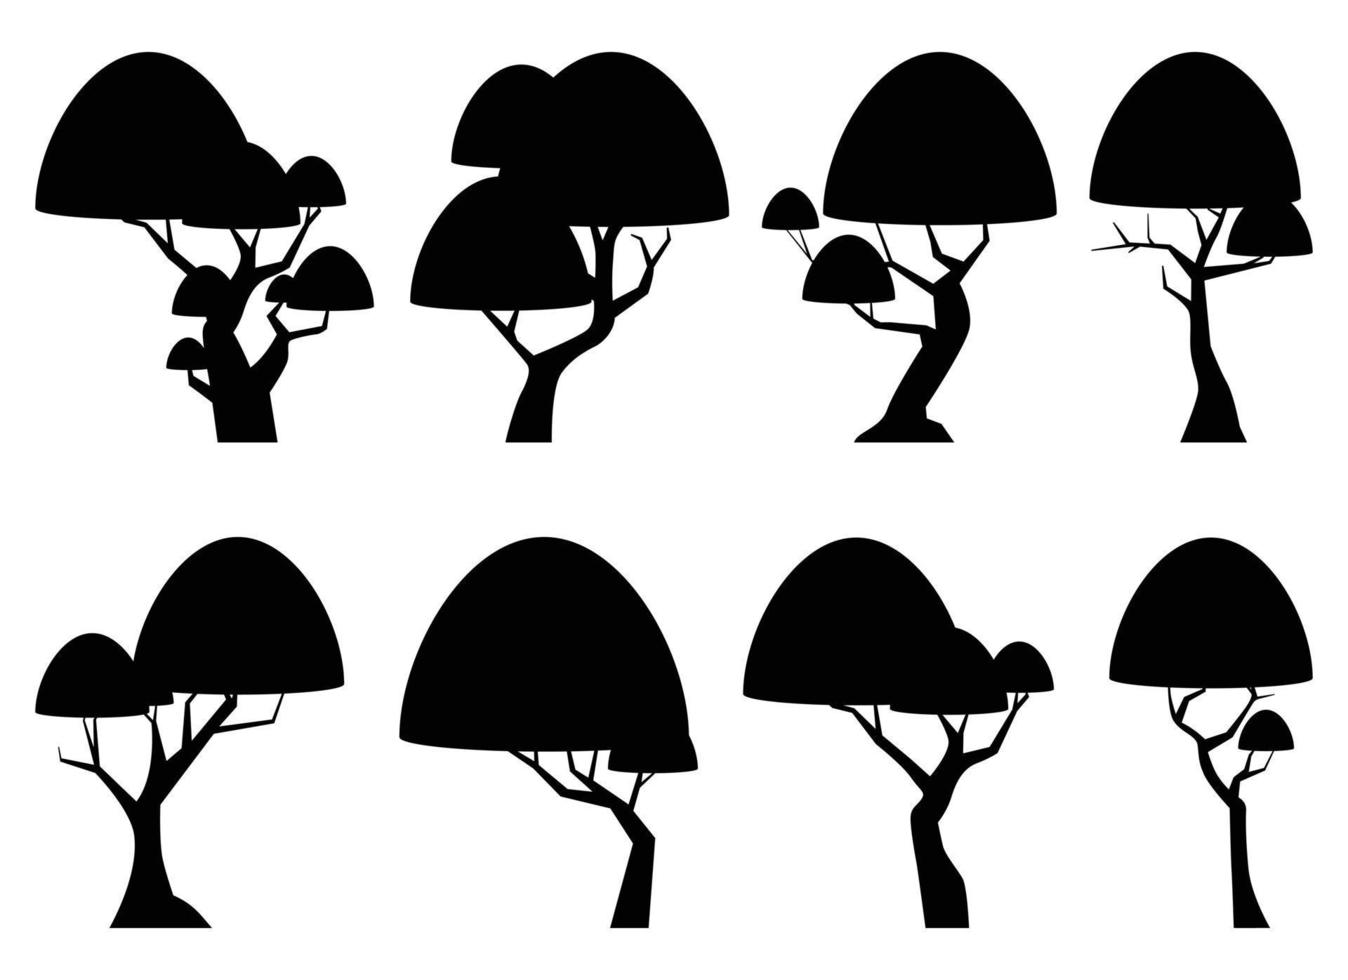 Cartoon tree silhouette collection isolated on white. Forest trees vector illustration